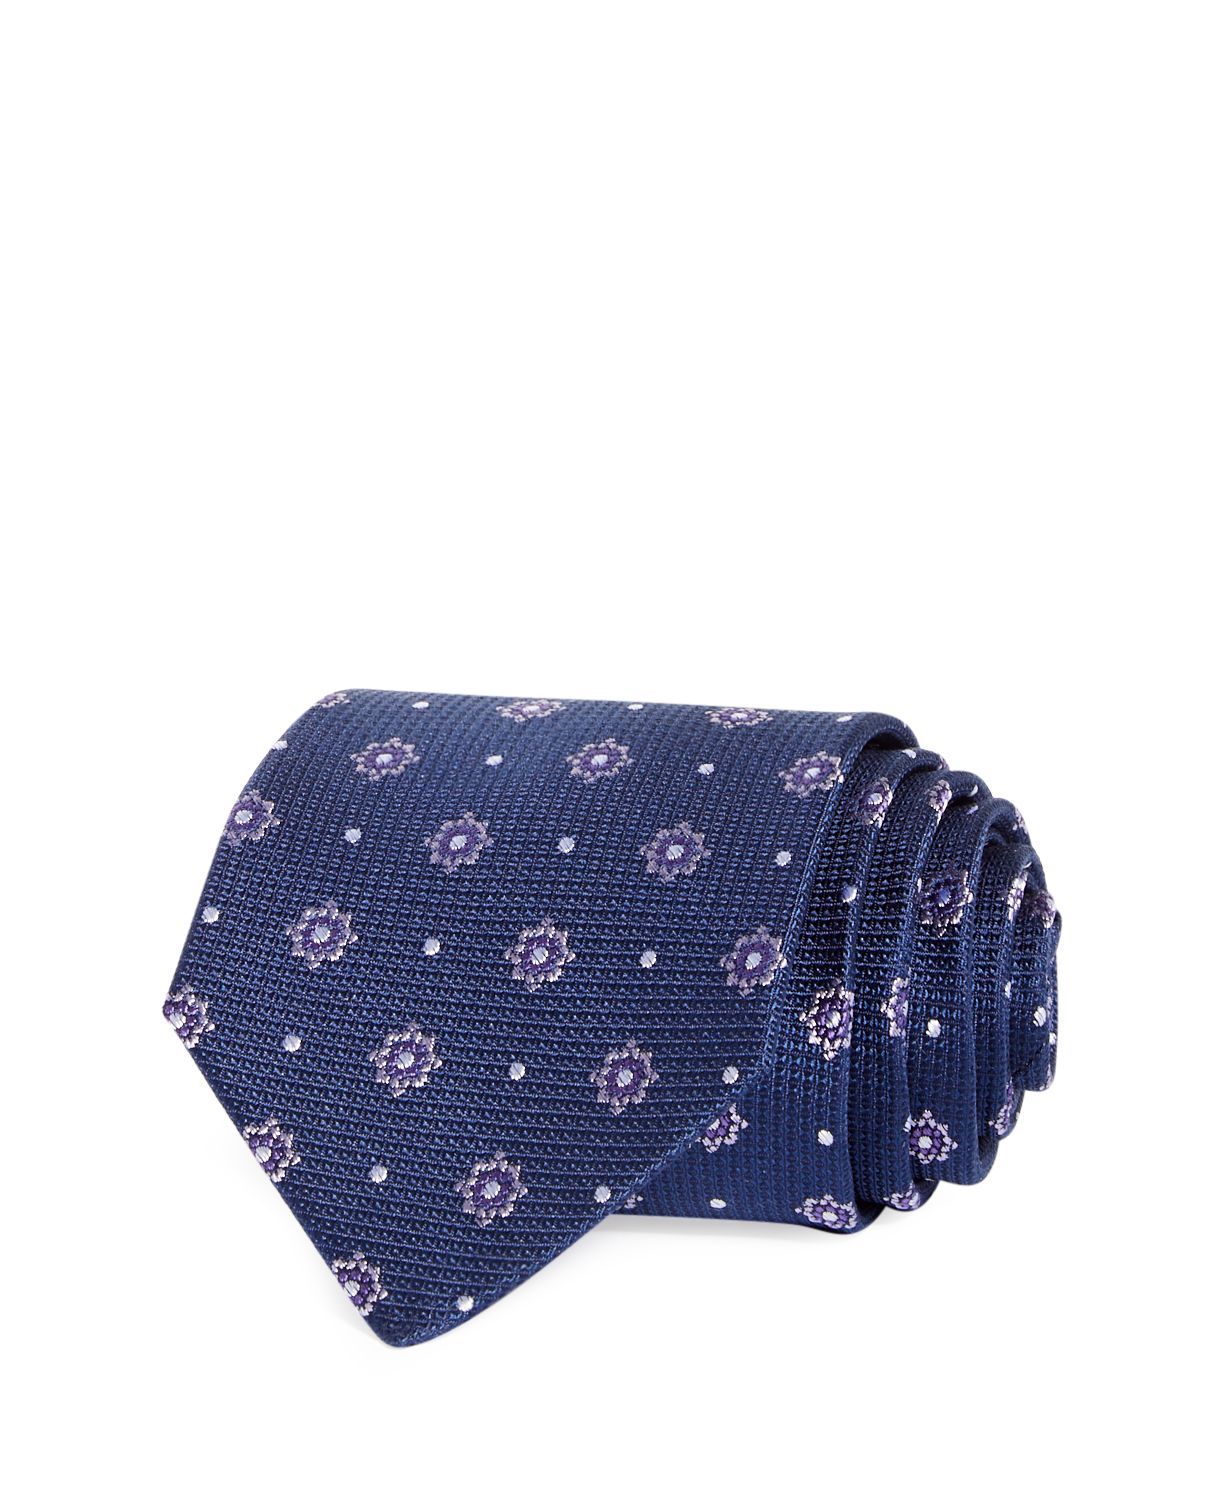 Brooks Brothers Medallion Jacquard Silk Tie in Navy Blue Mens Accessories Ties for Men 